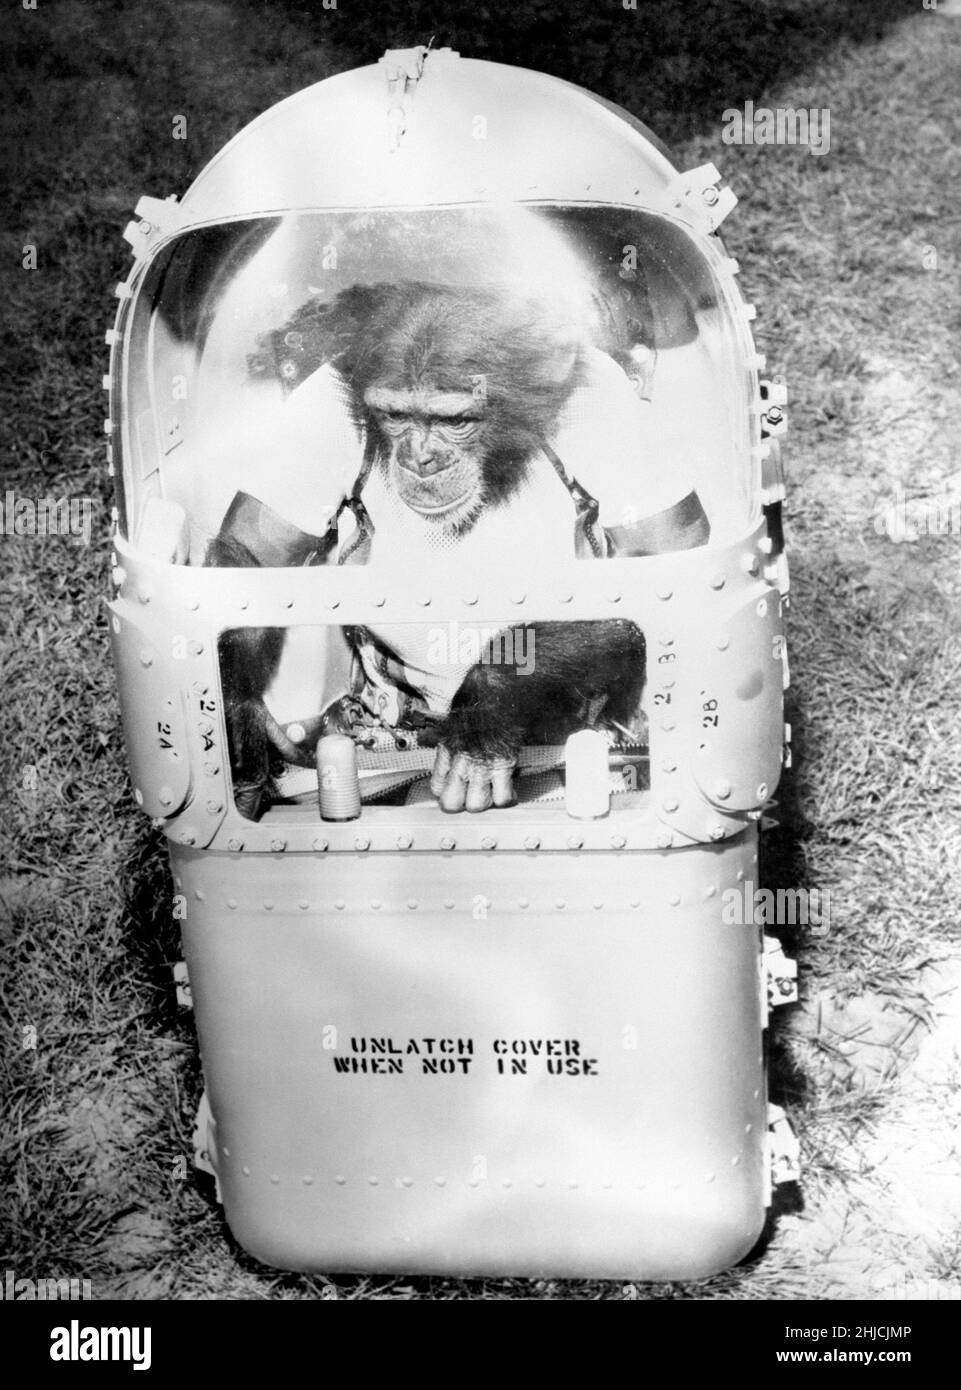 Ham in his flight couch, after his flight. On January 31, 1961, a Mercury-Redstone launch from Cape Canaveral carried the chimpanzee, Ham, over 400 miles down range in an arching trajectory that reached a peak of 158 miles above the Earth. The mission was successful and Ham performed his lever-pulling task well in response to the flashing light. Stock Photo